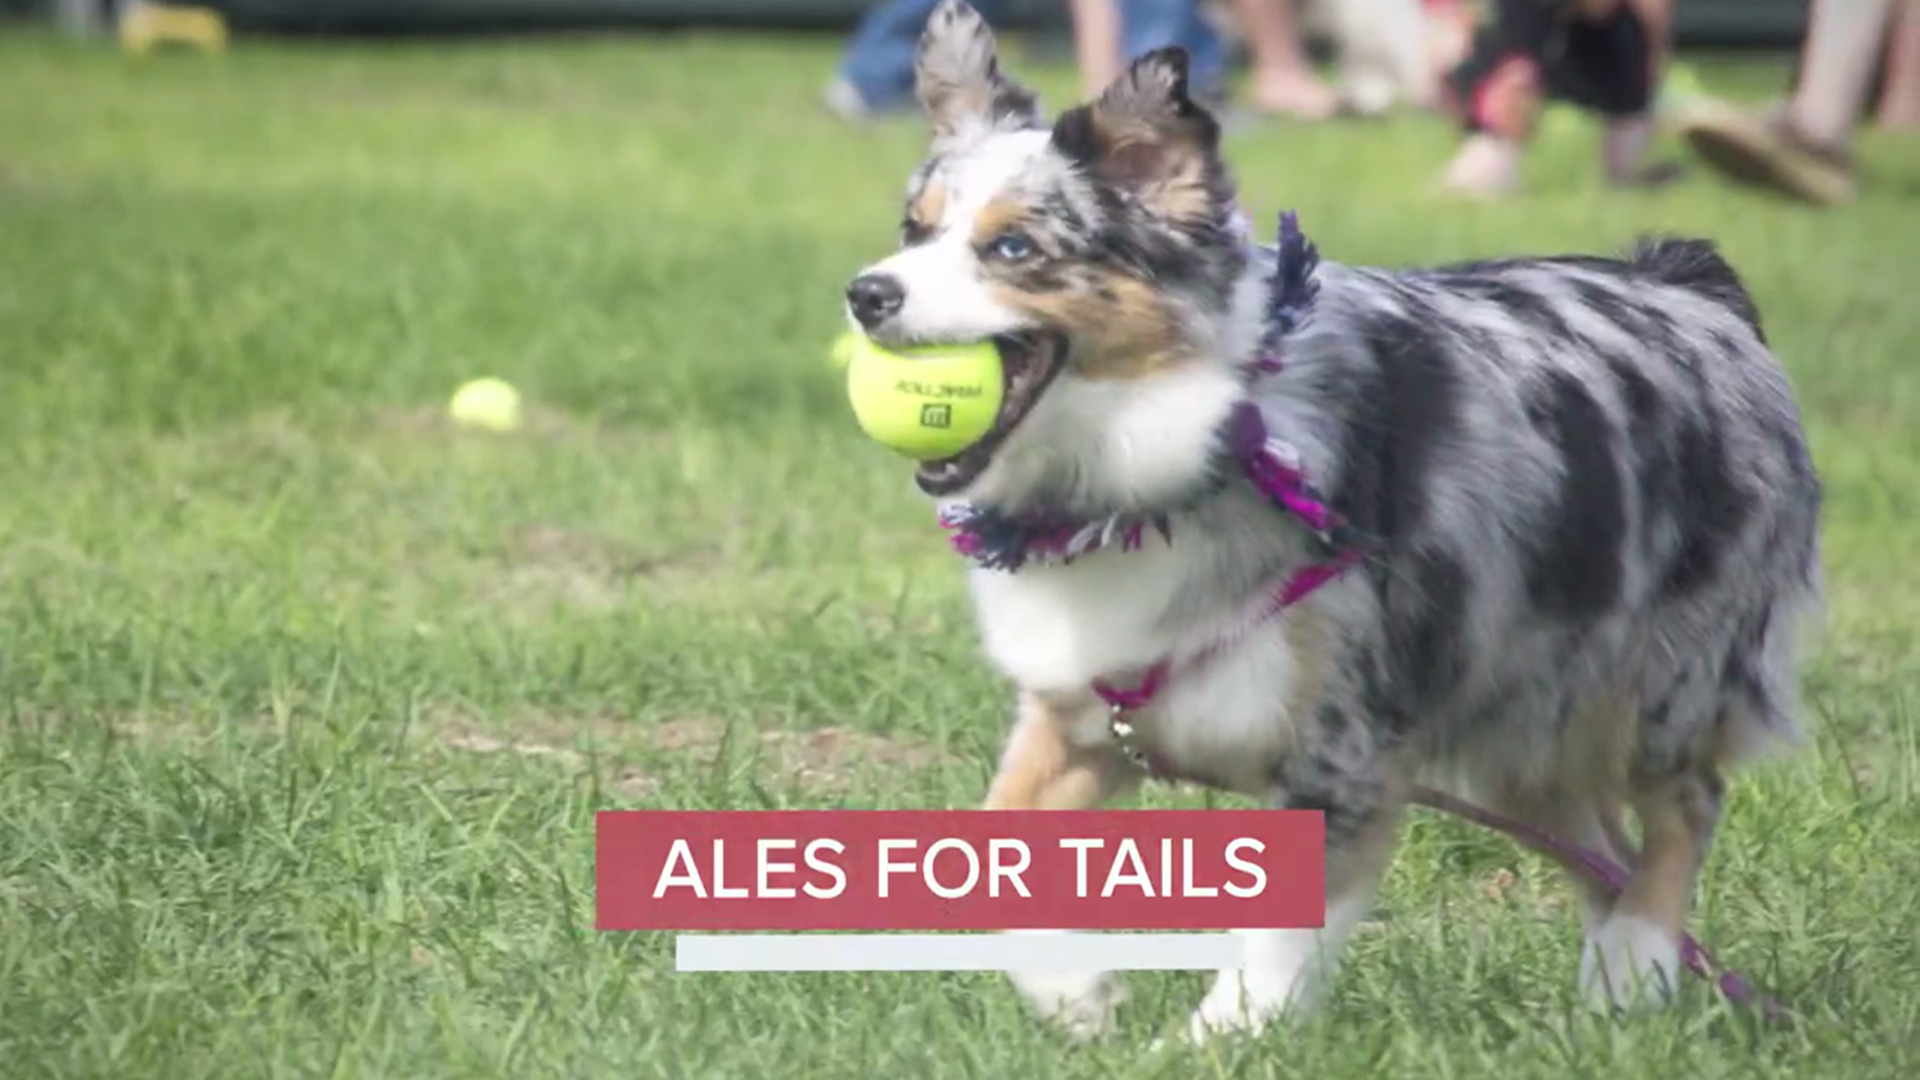 Animal Refuge League of Greater Portland Ales for Tails event is back, August 24 at Thompson's Point.